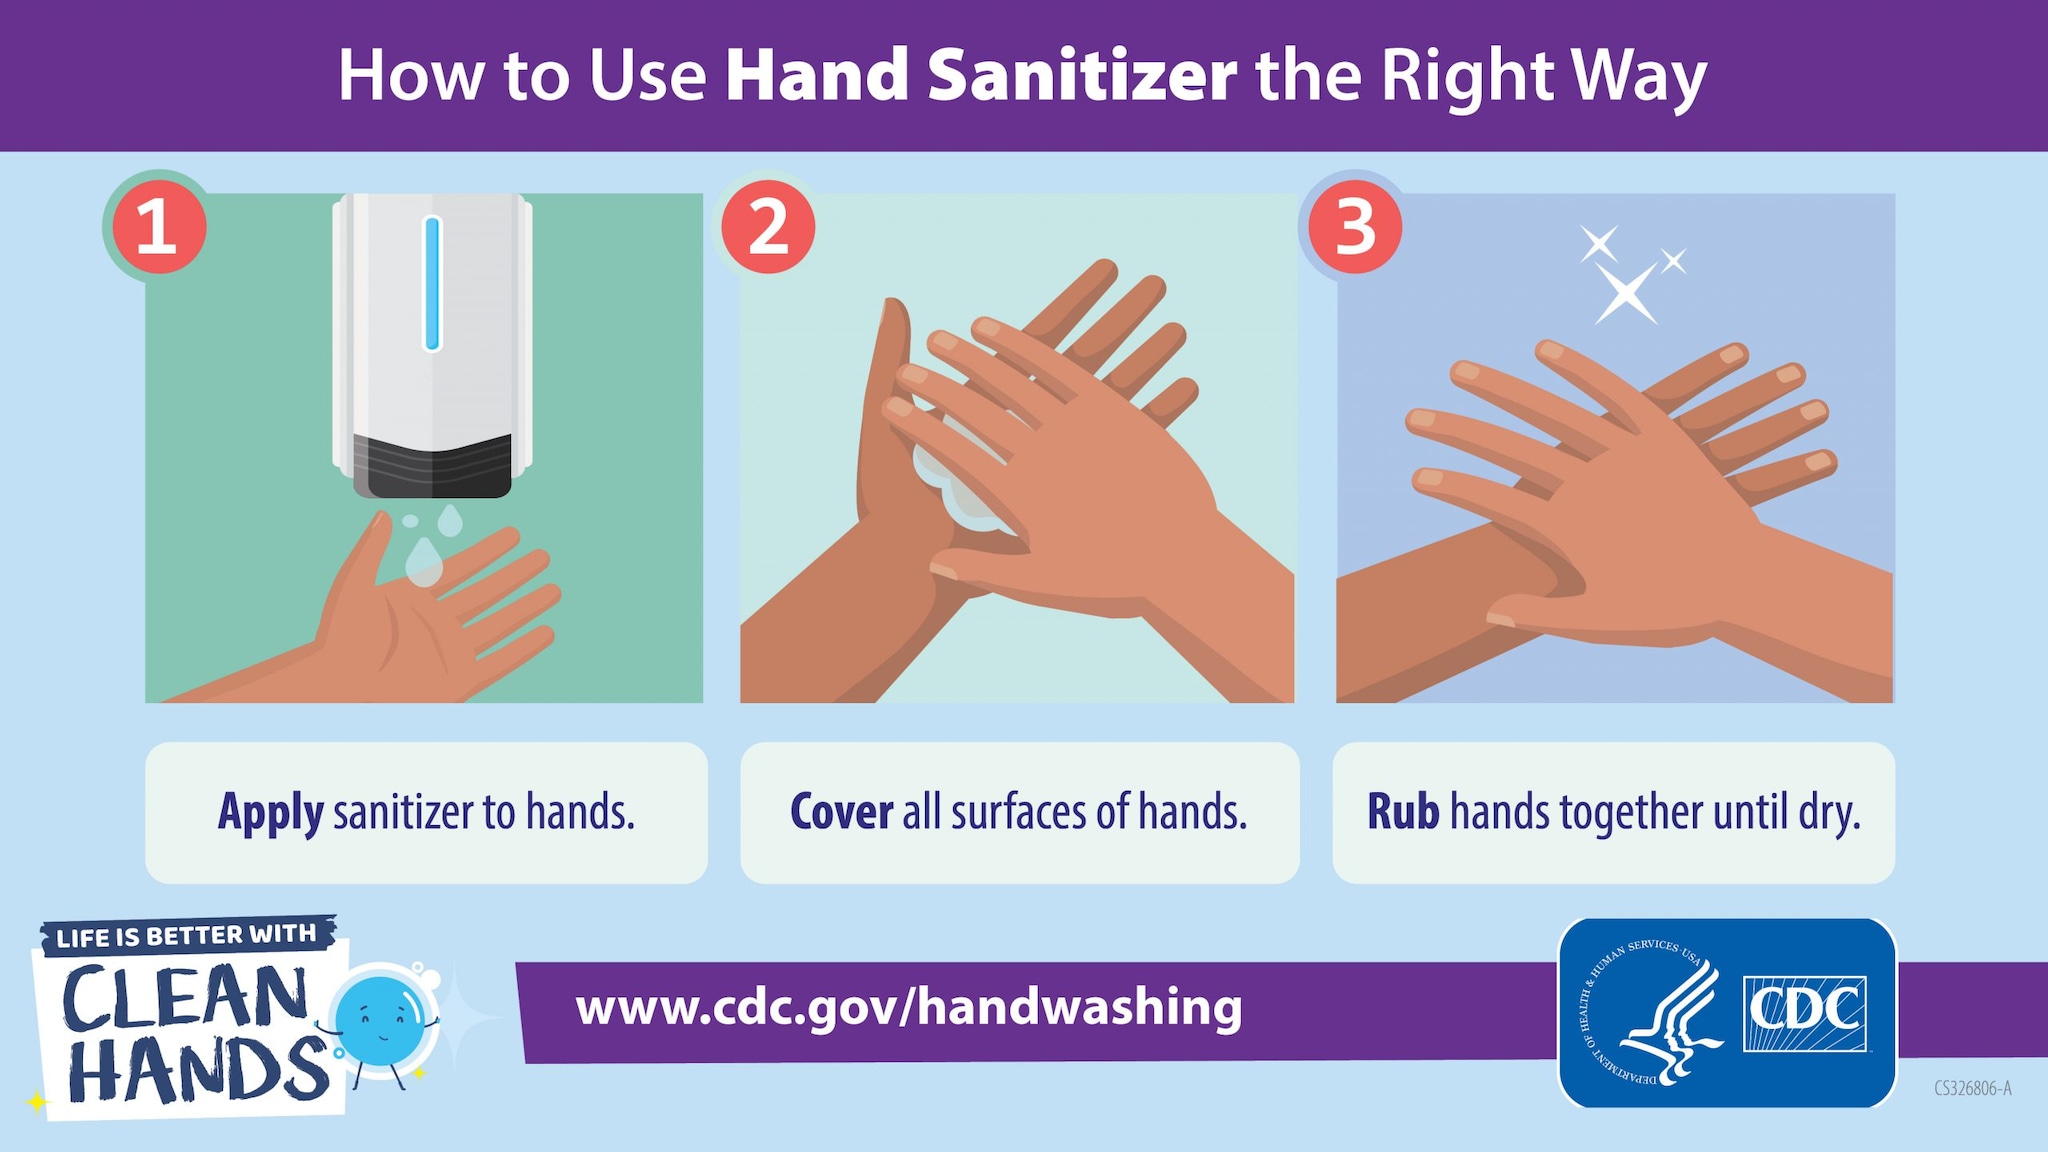 How to Use Hand Sanitizer the Right Way